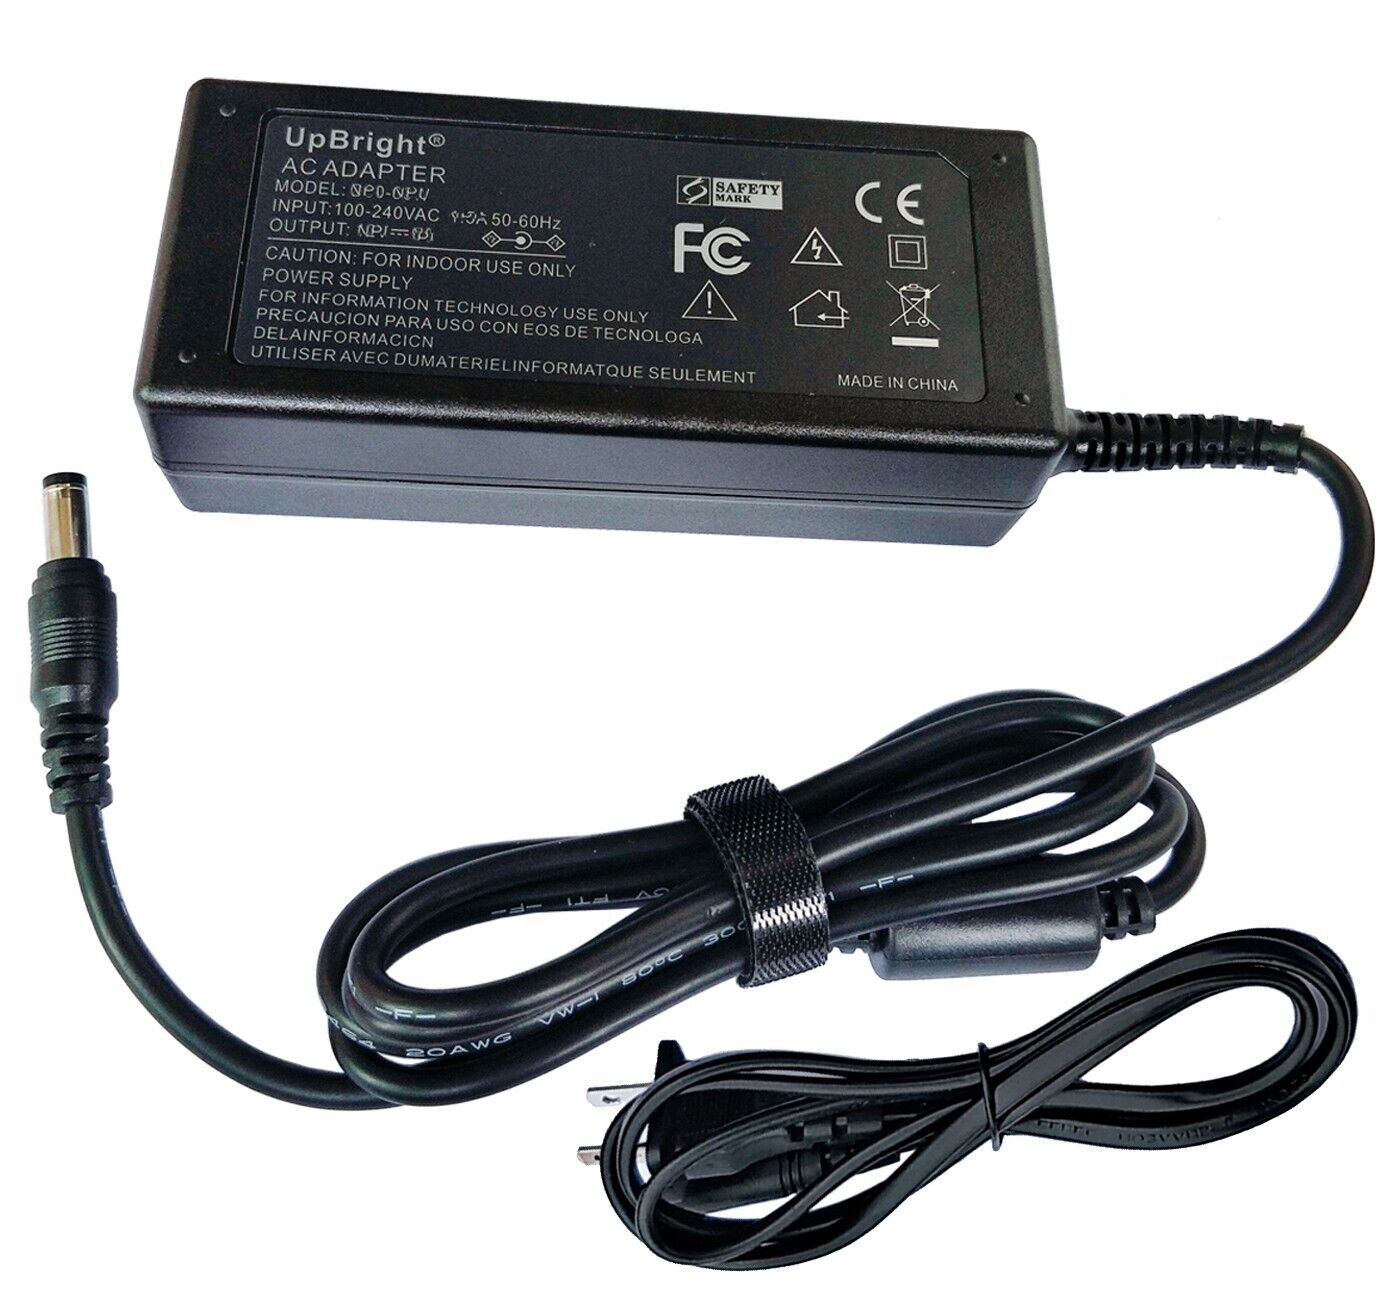 AC Adapter For Cassida 6600 Digital Currency Counter Counterfeit Detection Money